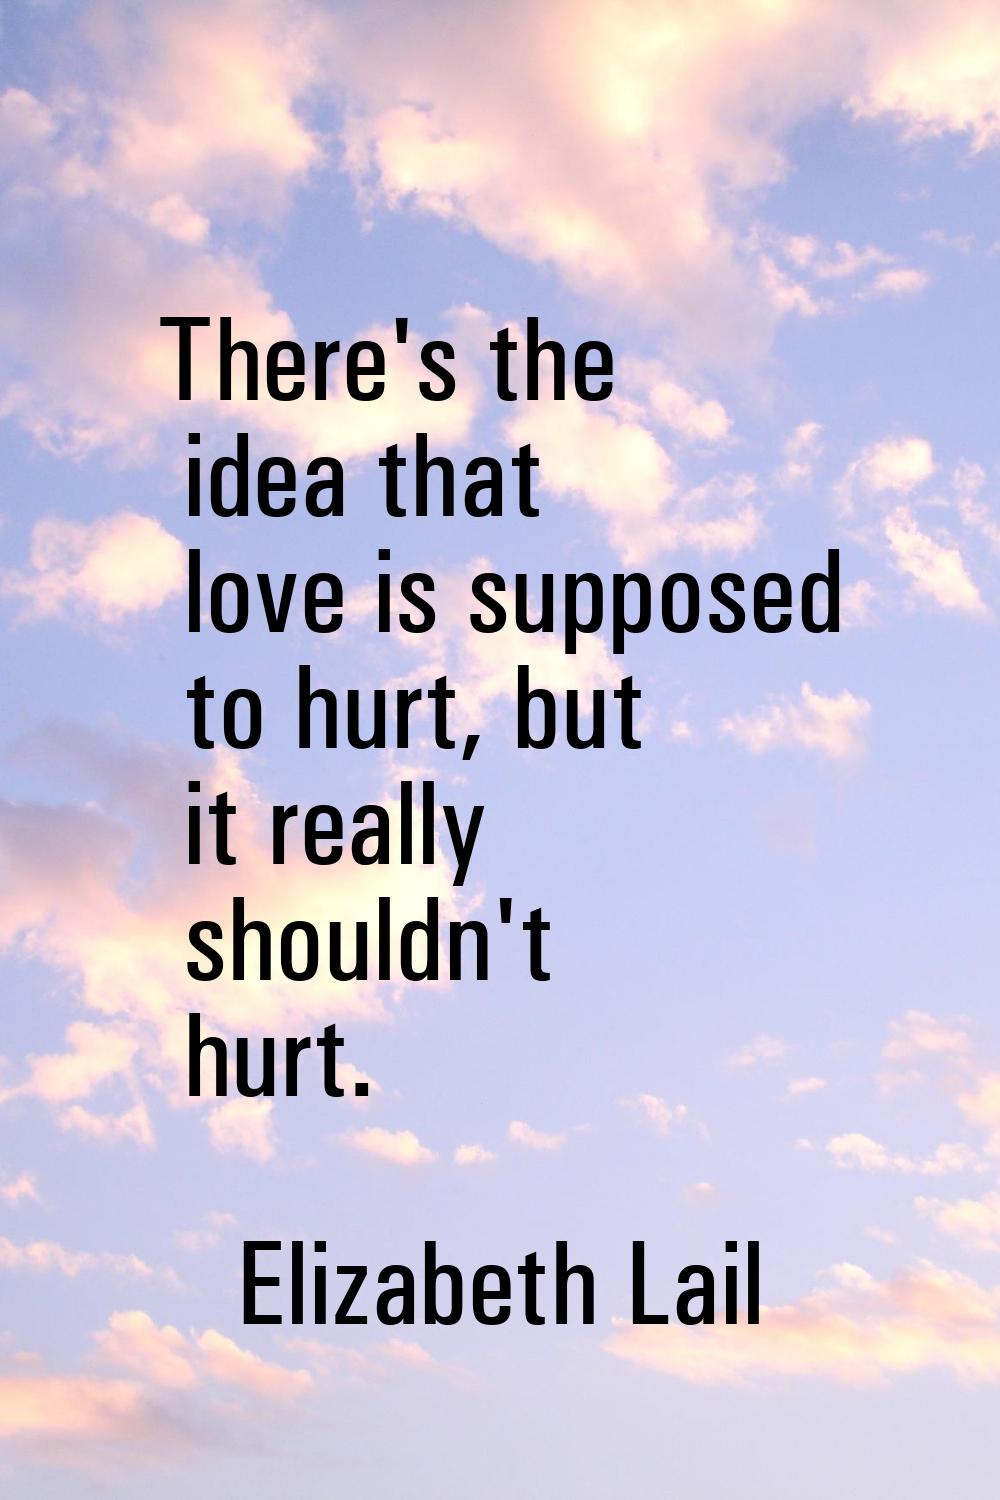 There's the idea that love is supposed to hurt, but it really shouldn't hurt.